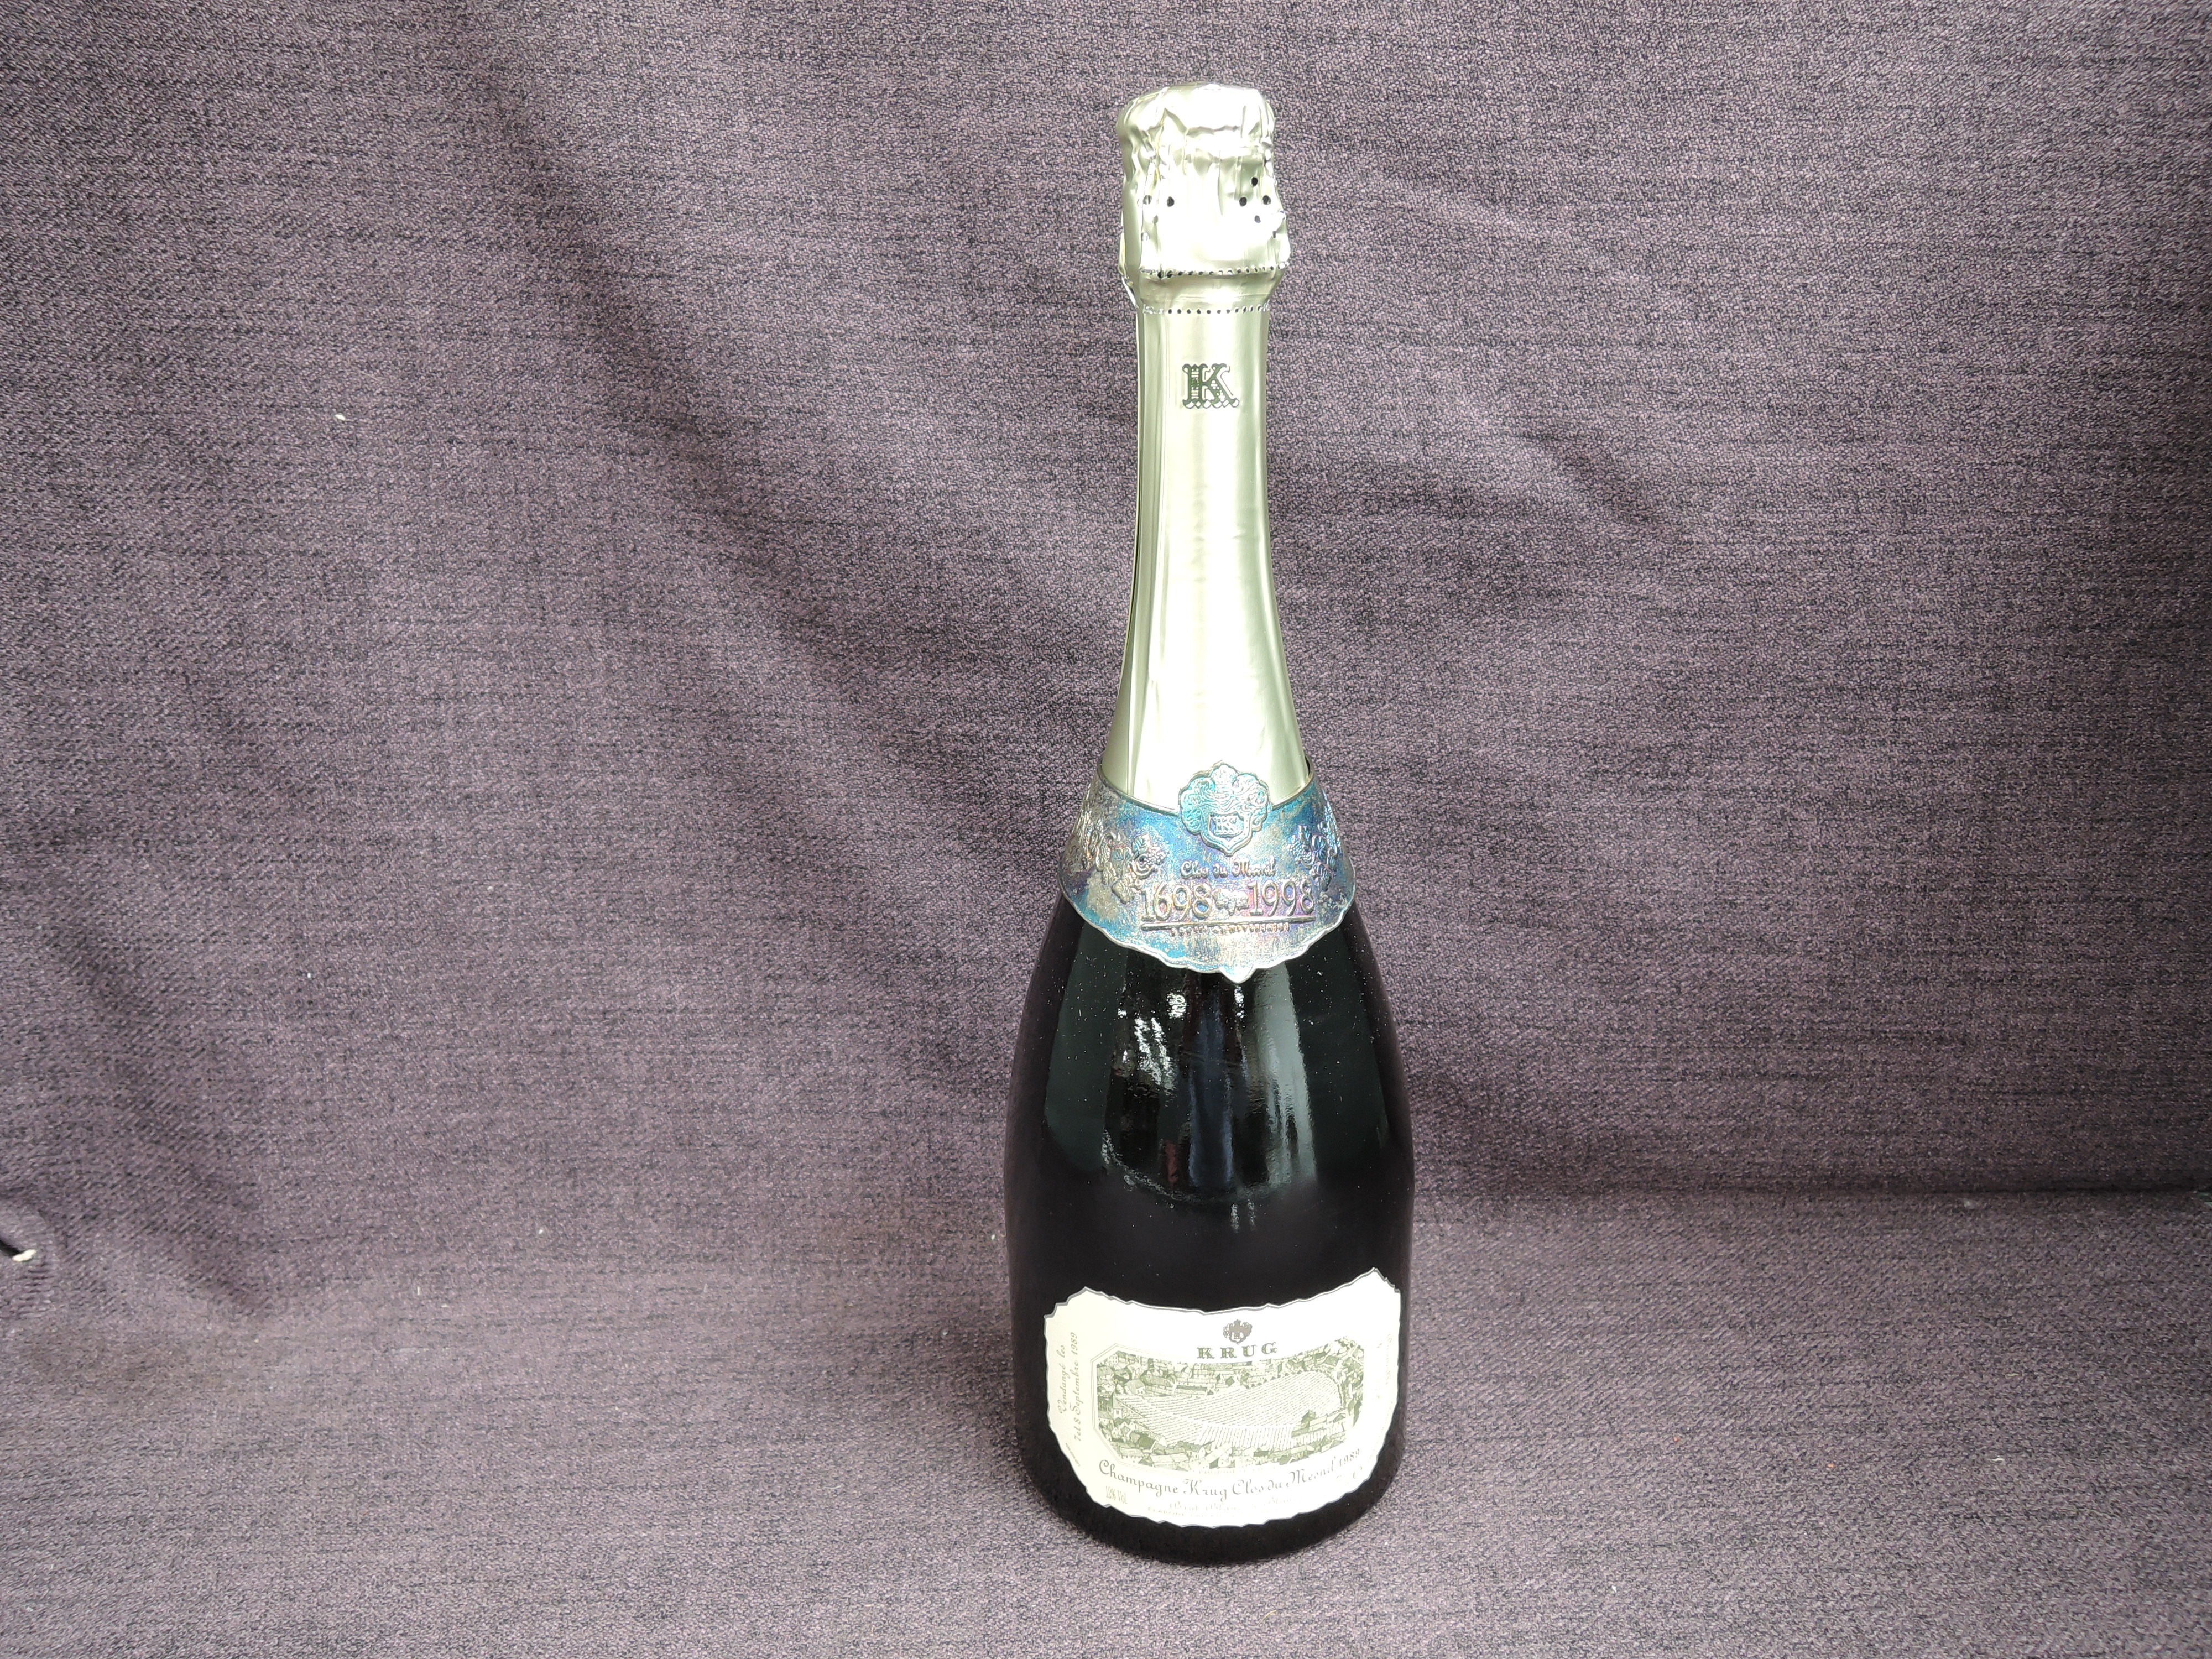 A bottle of Krug Clos Du Mesnil 1989 Champagne, 1698-1998 300 year anniversary, bottle no 07078, 12% - Image 2 of 8